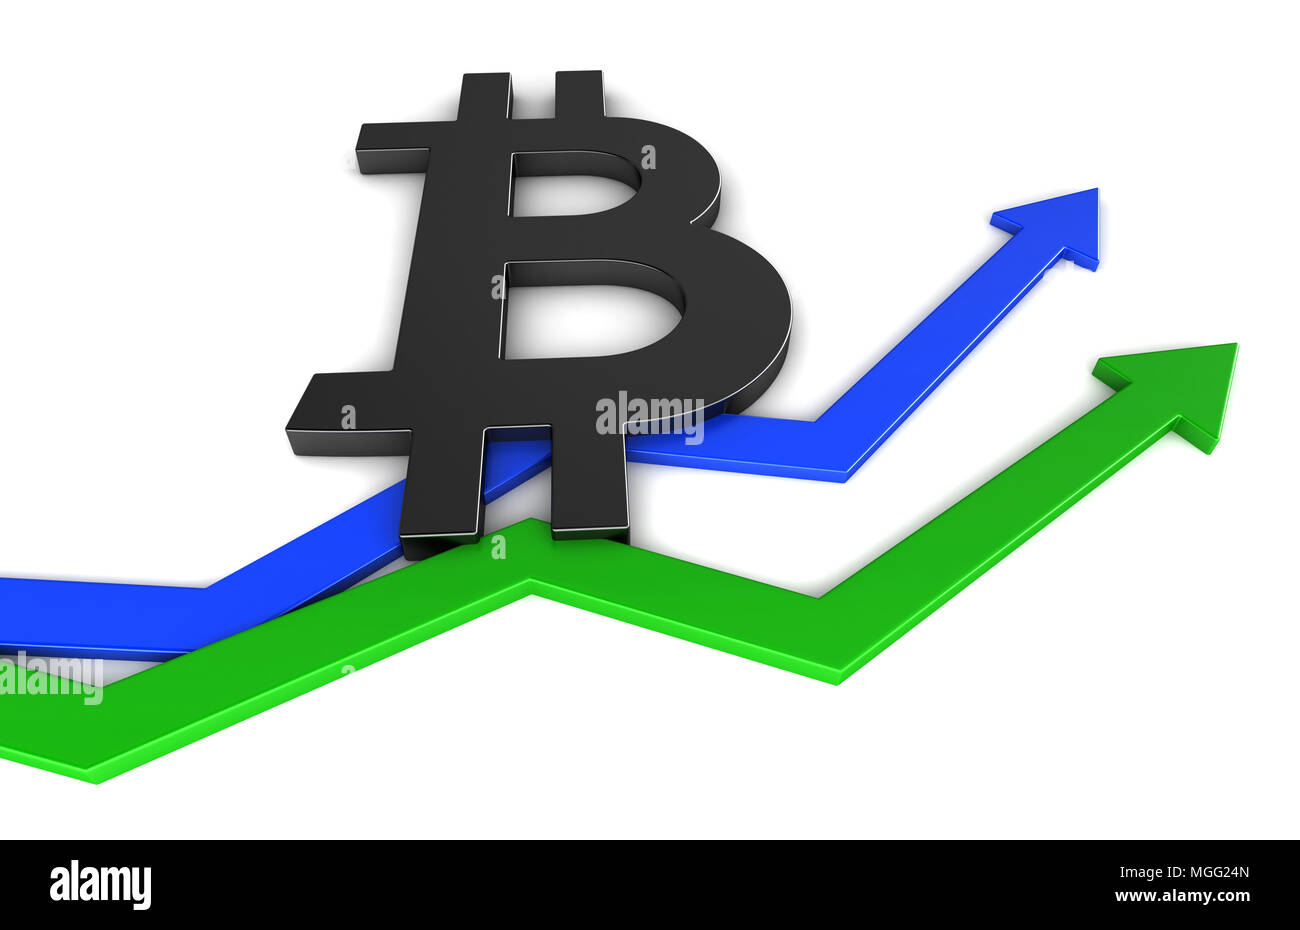 Conceptual 3d render of bitcoin symbol on white background Stock Photo